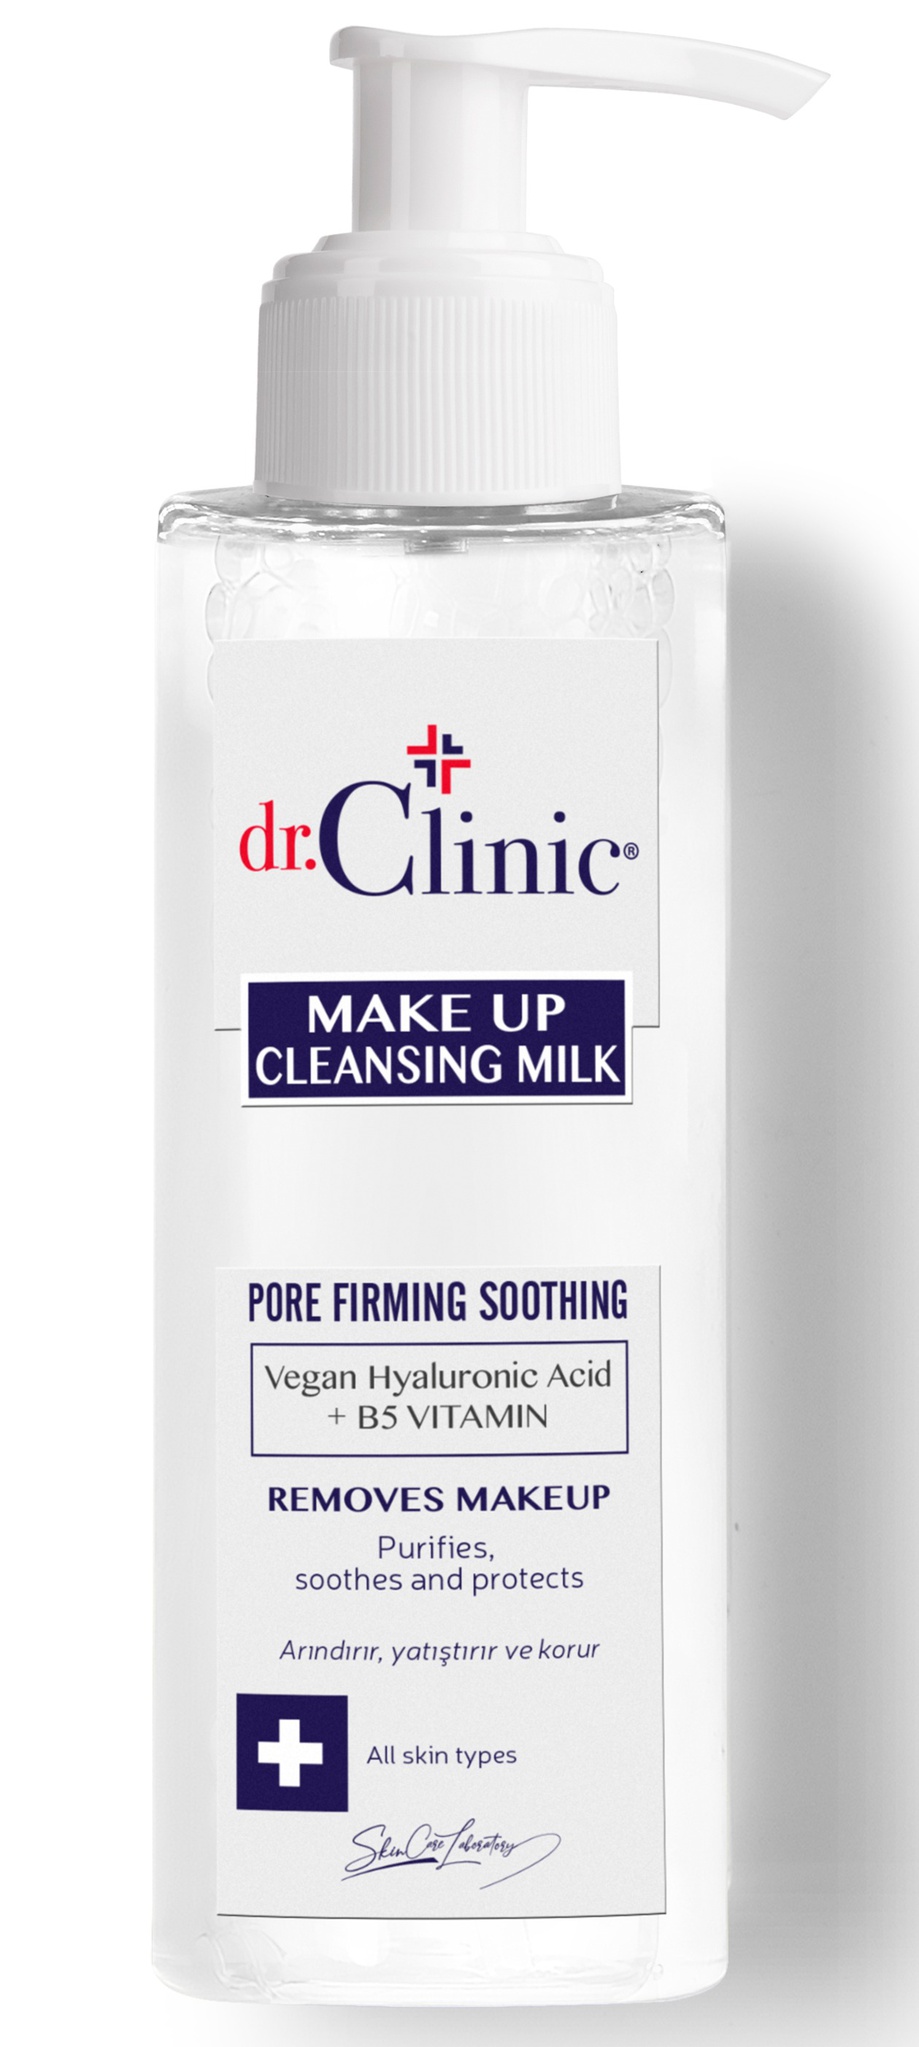 dr.Clinic Make Up Cleansing Milk